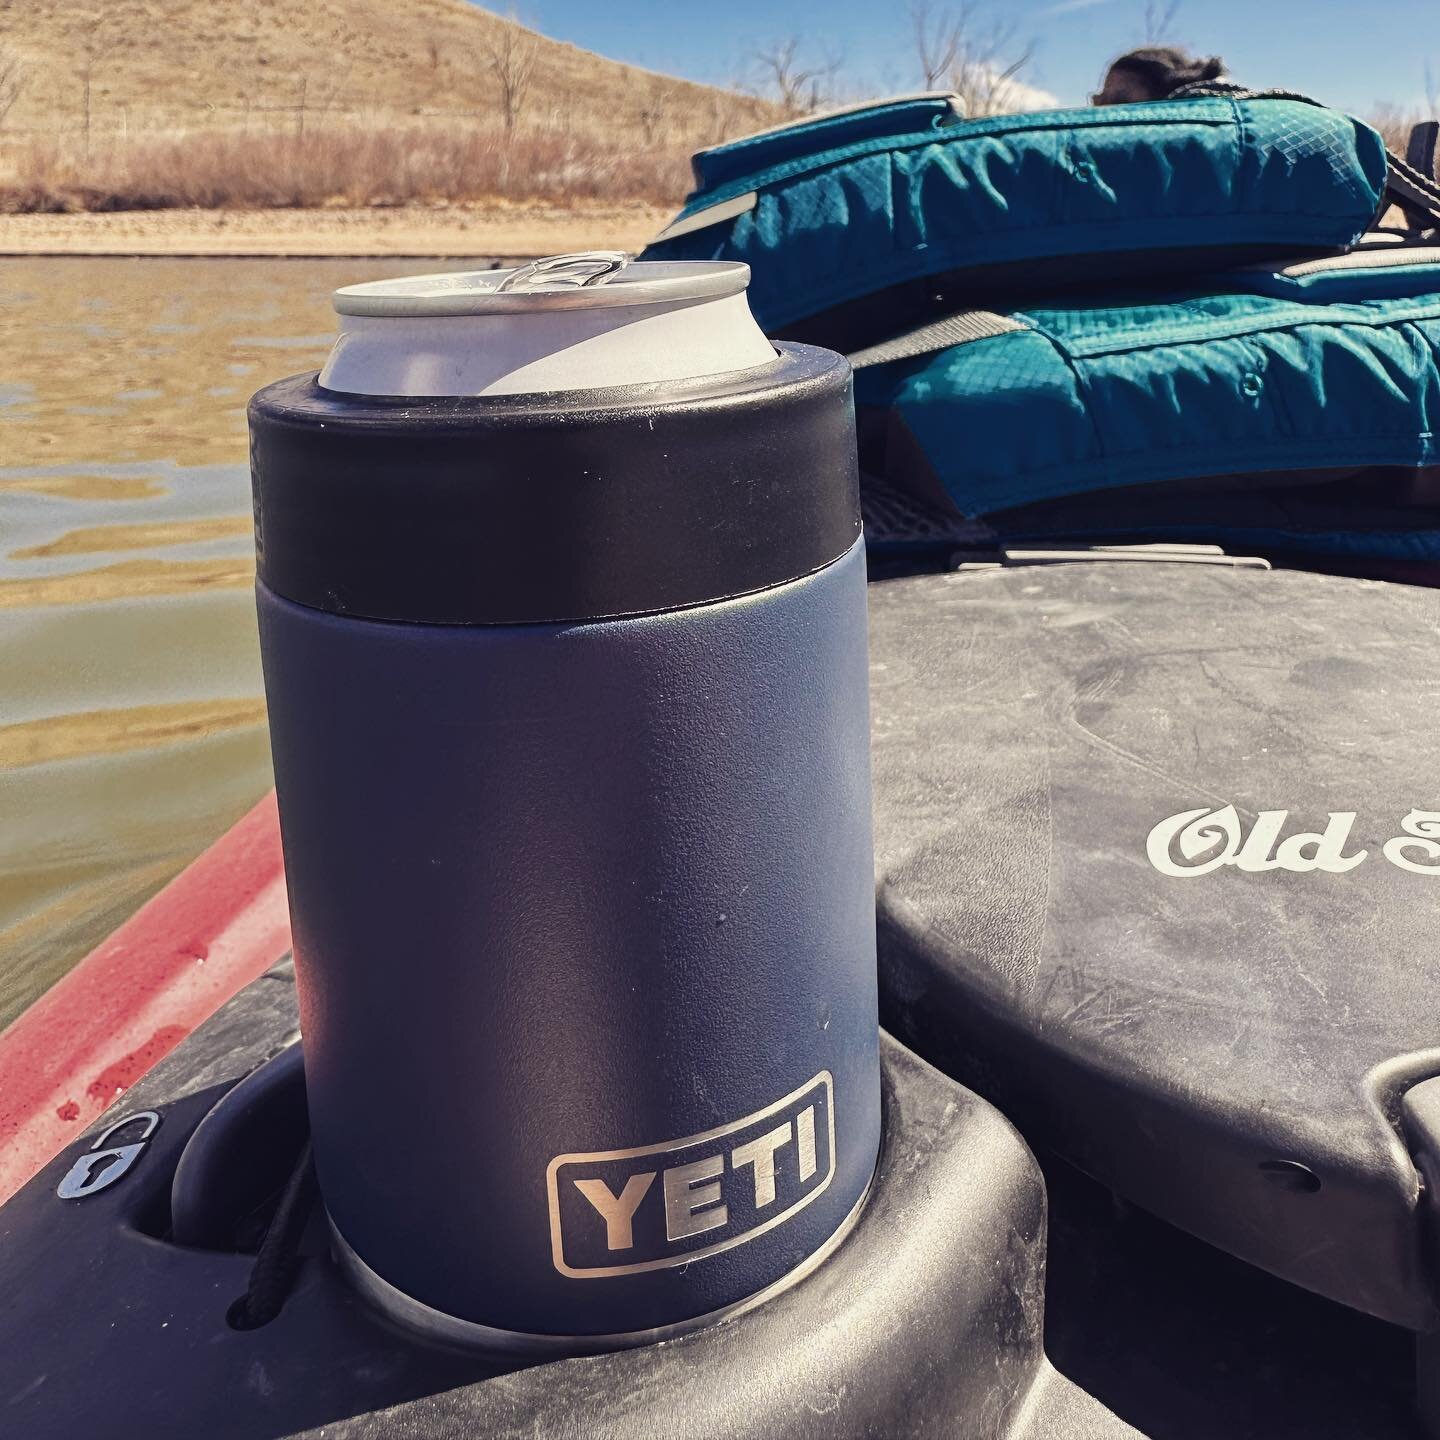 After a busy and surreal day yesterday, spending this beautiful #Denver day recharging on Bear Creek Lake with my kayak, my @yeti, and my love!